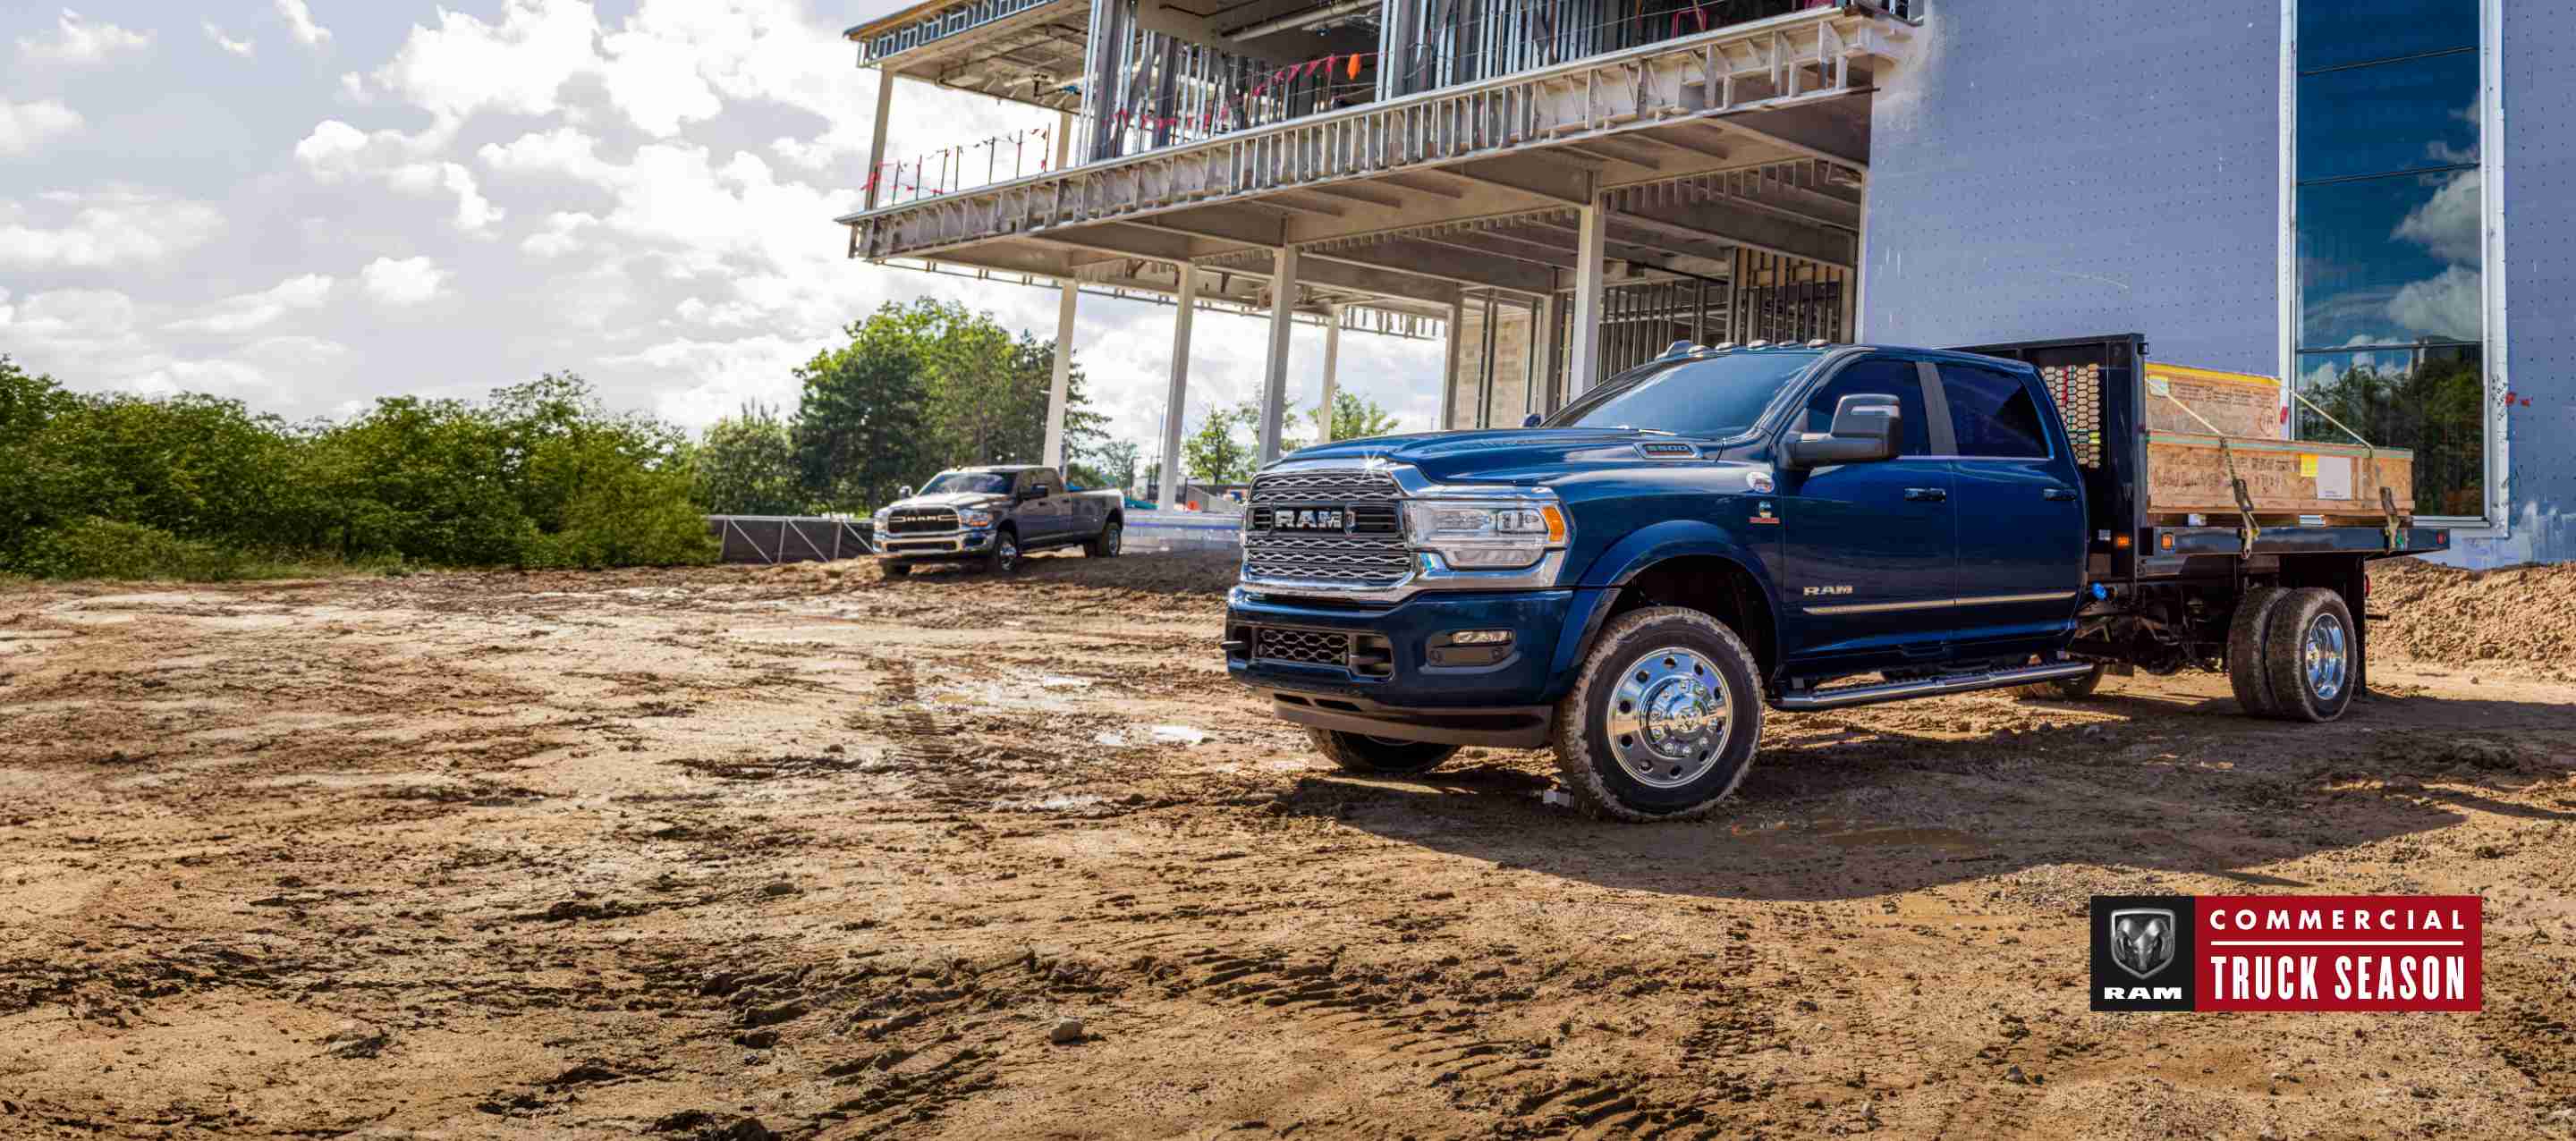 A blue 2023 Ram 5500 Limited Chassis Cab 4x4 Crew Cab with utility bed upfit, parked at a commercial building site. Ram Commercial Truck Season.